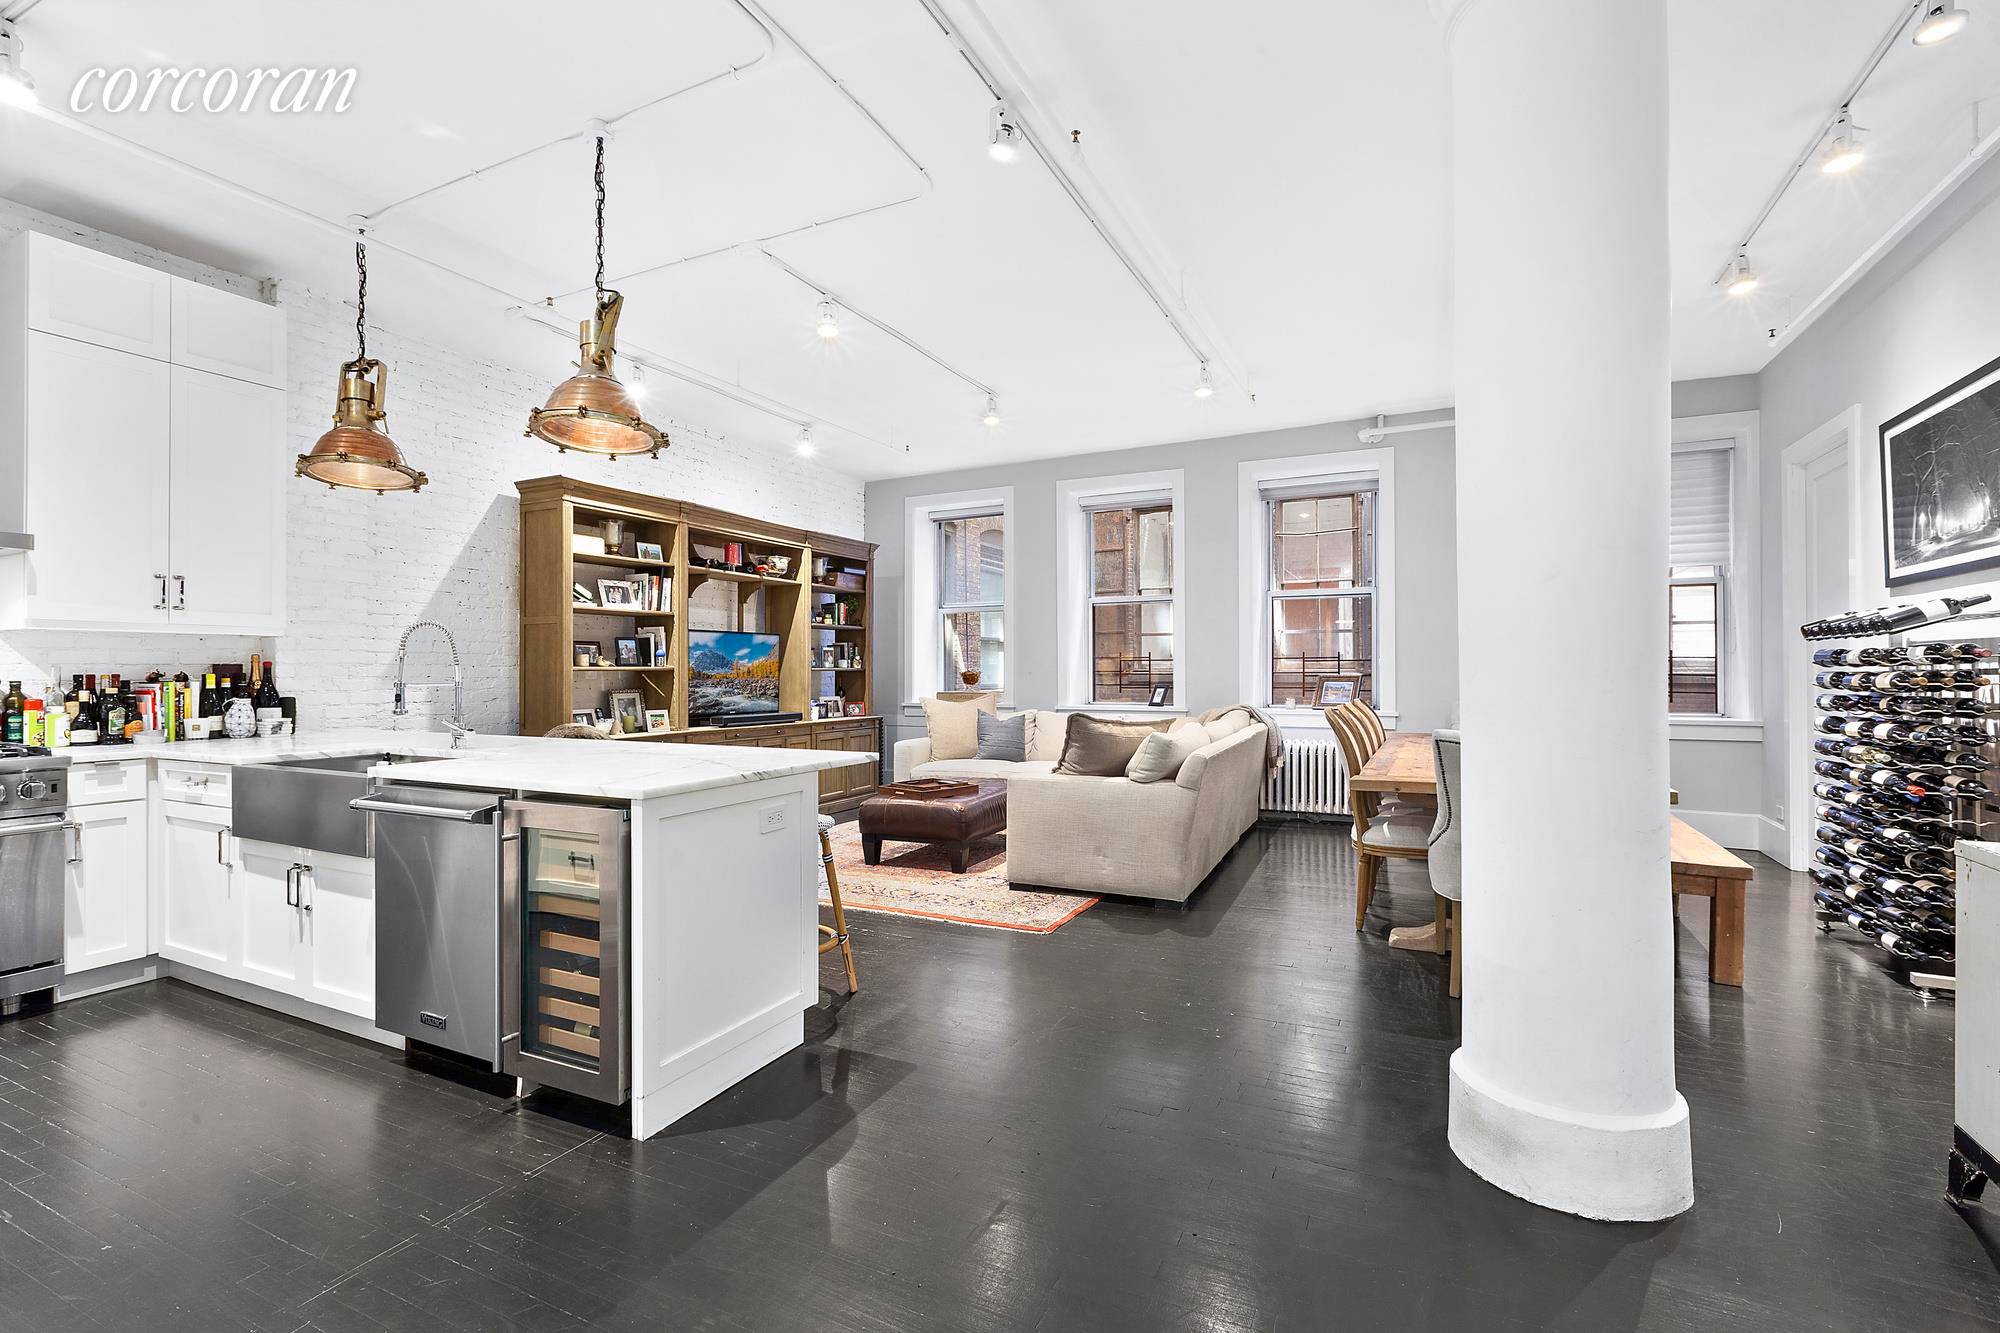 Come home to a pin drop quiet, authentic and beautifully renovated loft in one of the most sought after neighborhoods in New York City, where Flatiron meets NoMad.